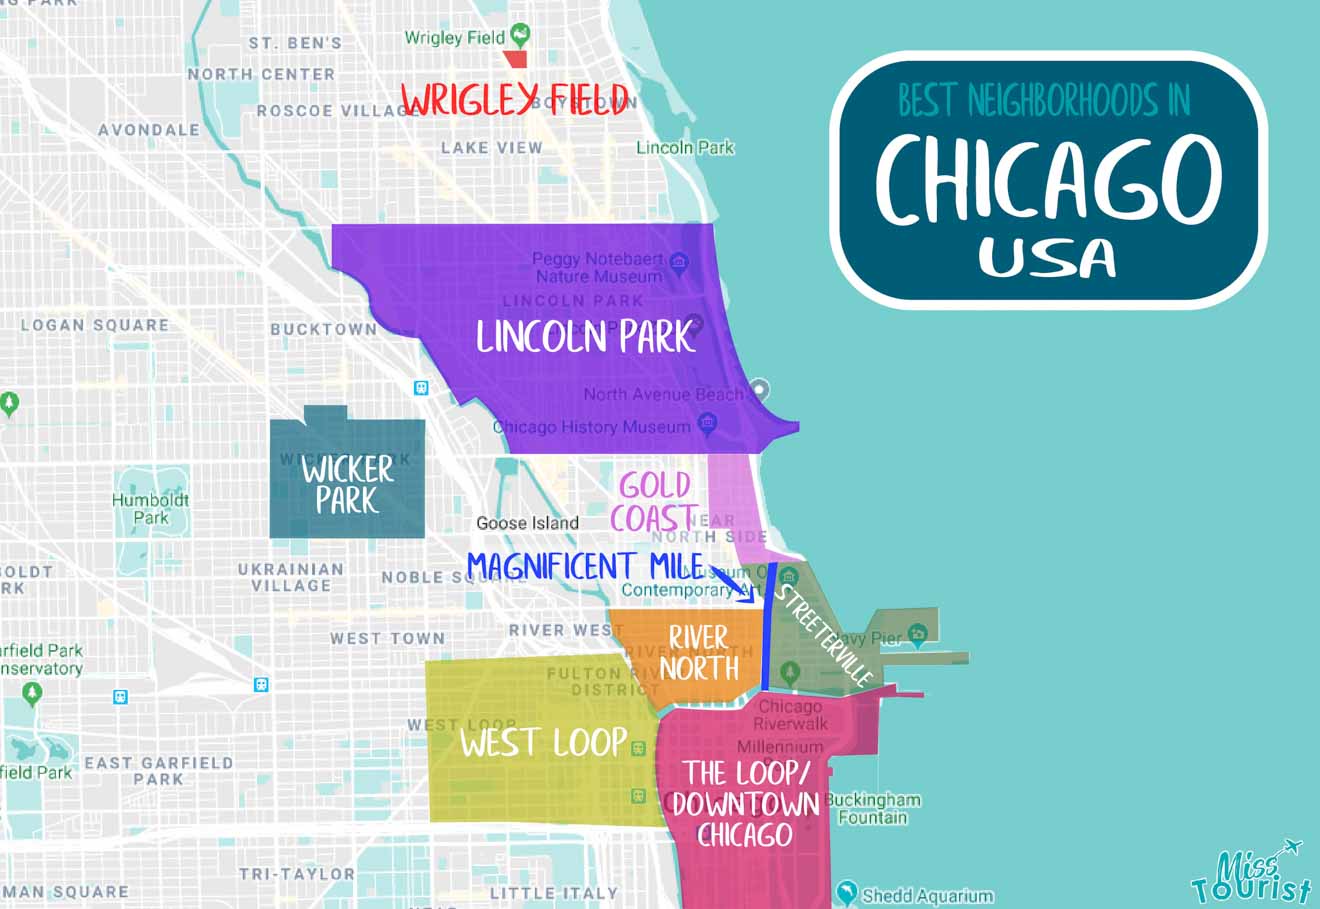 Where to Stay in Chicago → BEST Hotels and Areas (with Prices!)